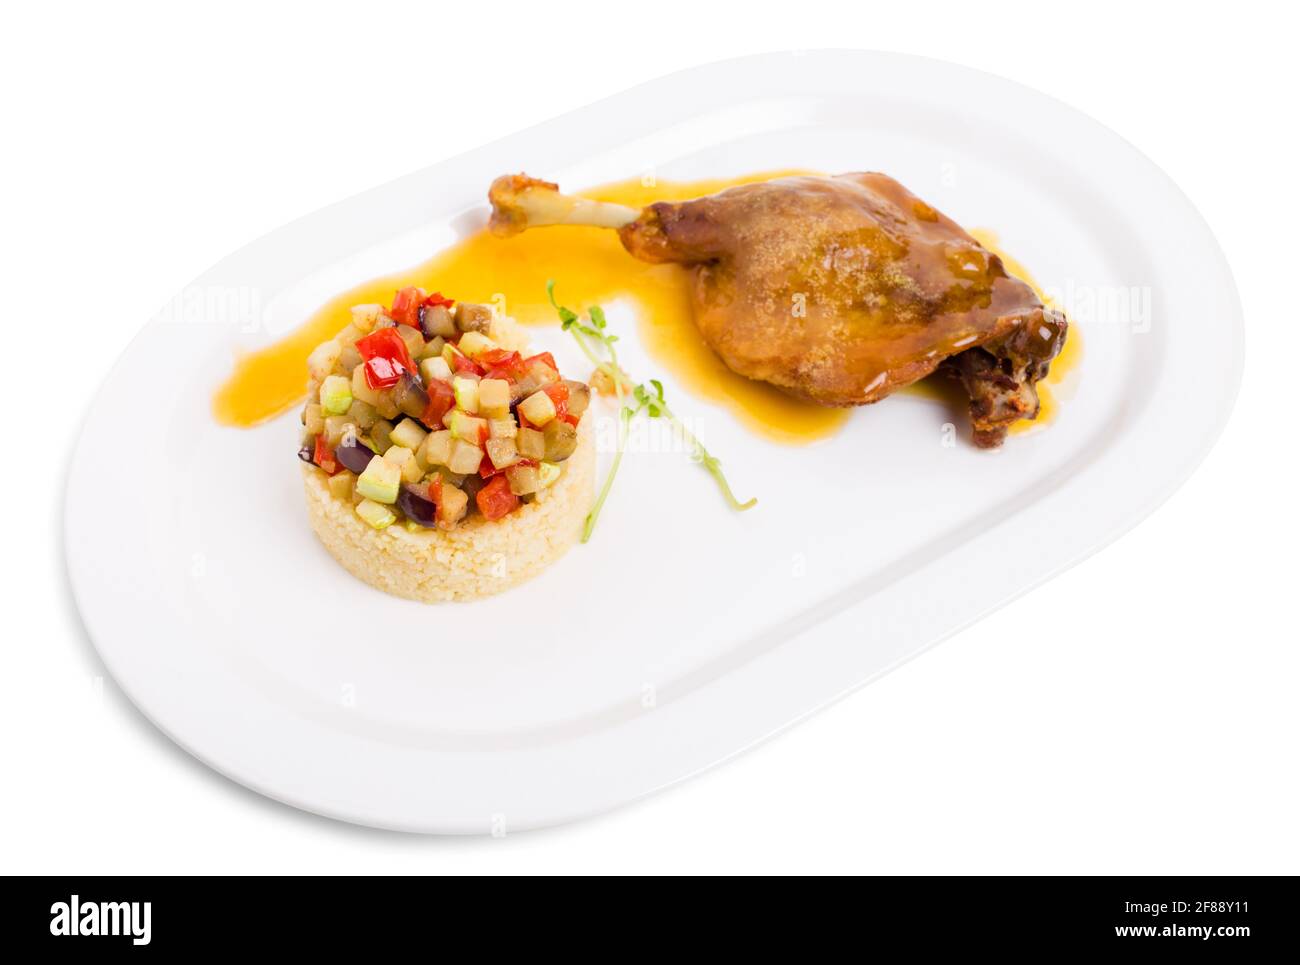 Duck leg confit with couscous and baked vegetables. Isolated on a white background. Stock Photo